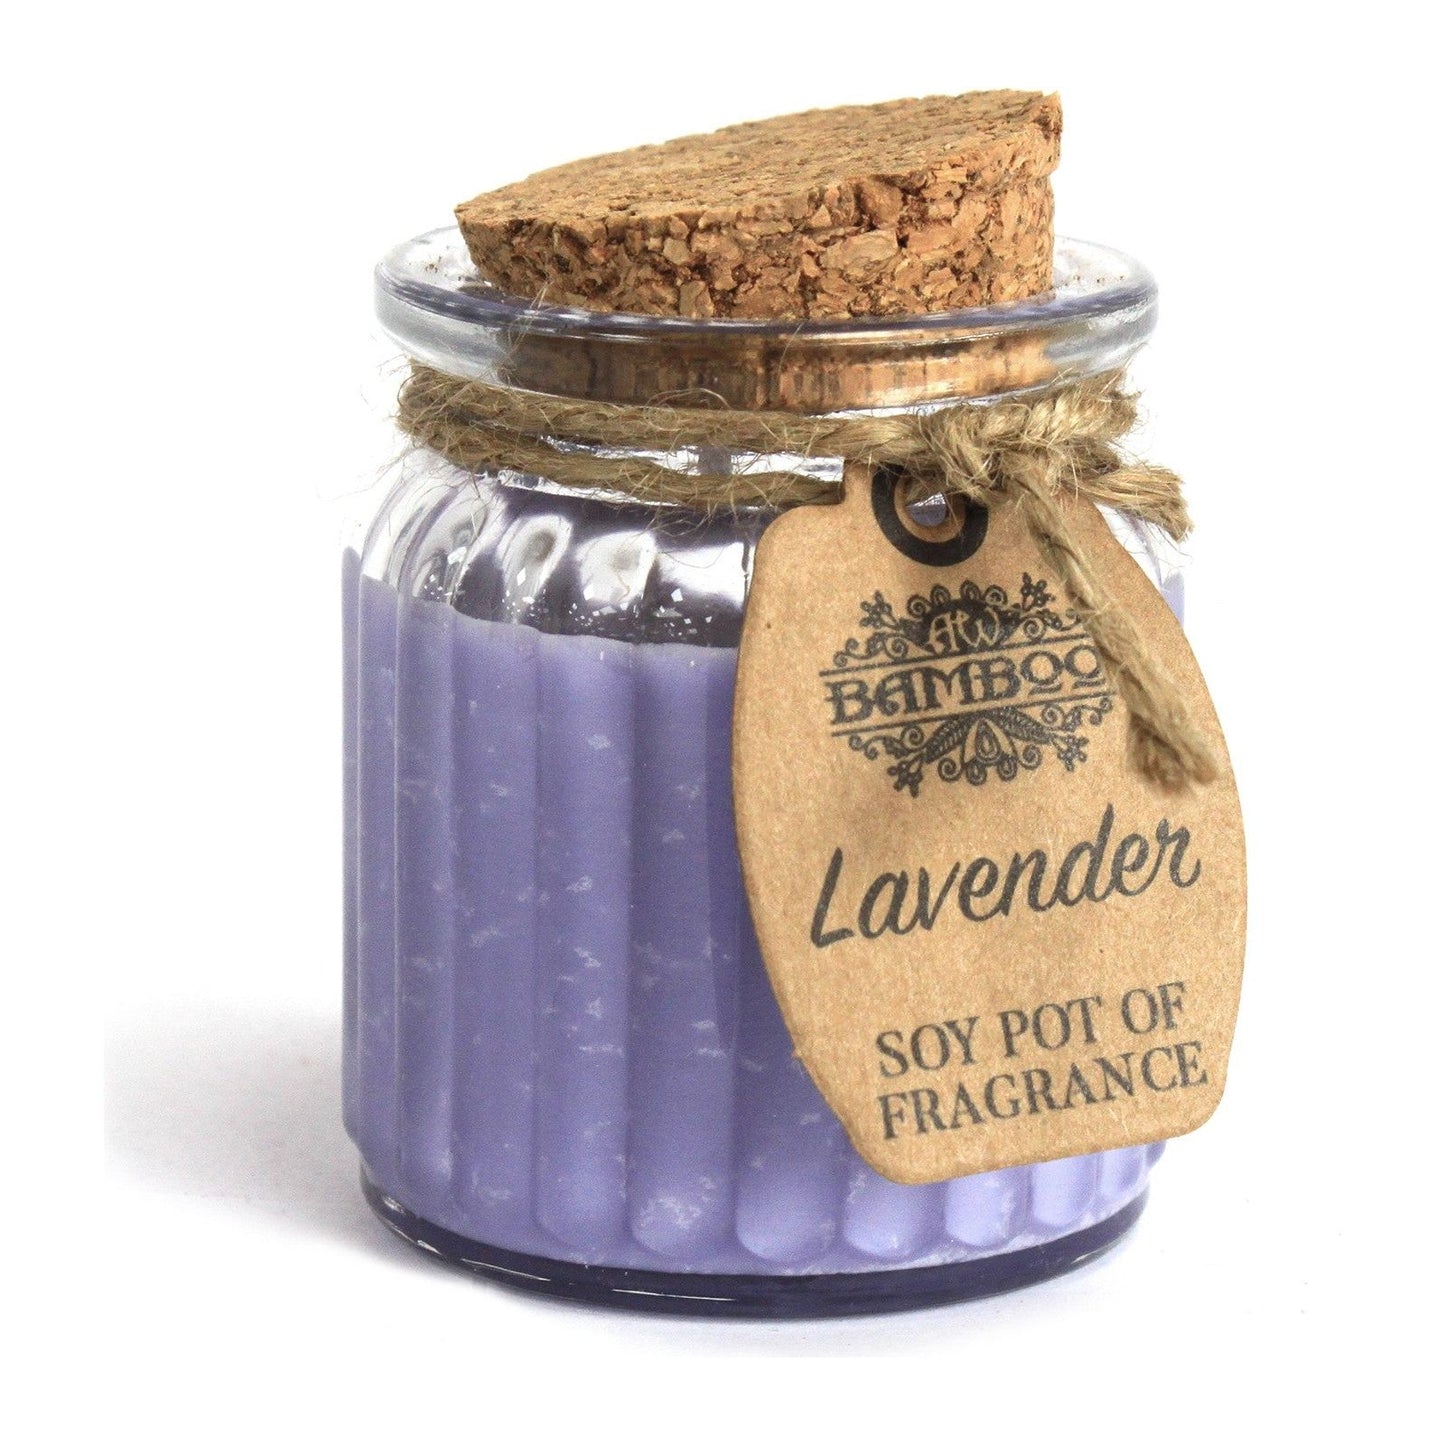 Lavender Soy Pot of Fragrance Candles x 2 - Ashton and Finch